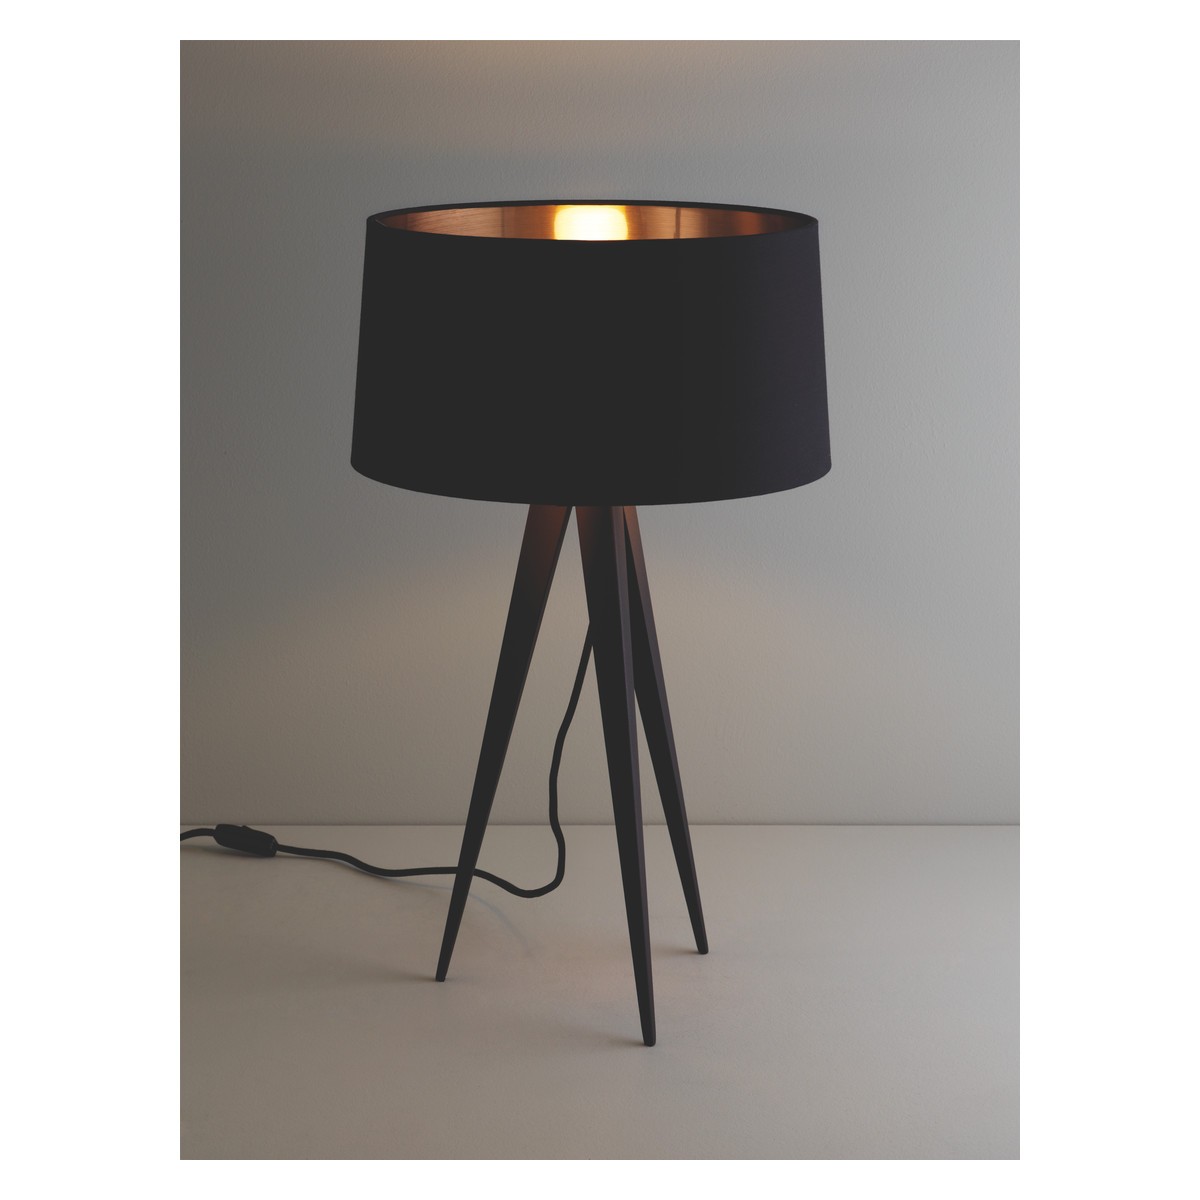 Pictures of ... YVES Black metal tripod table lamp base ... tripod table lamp